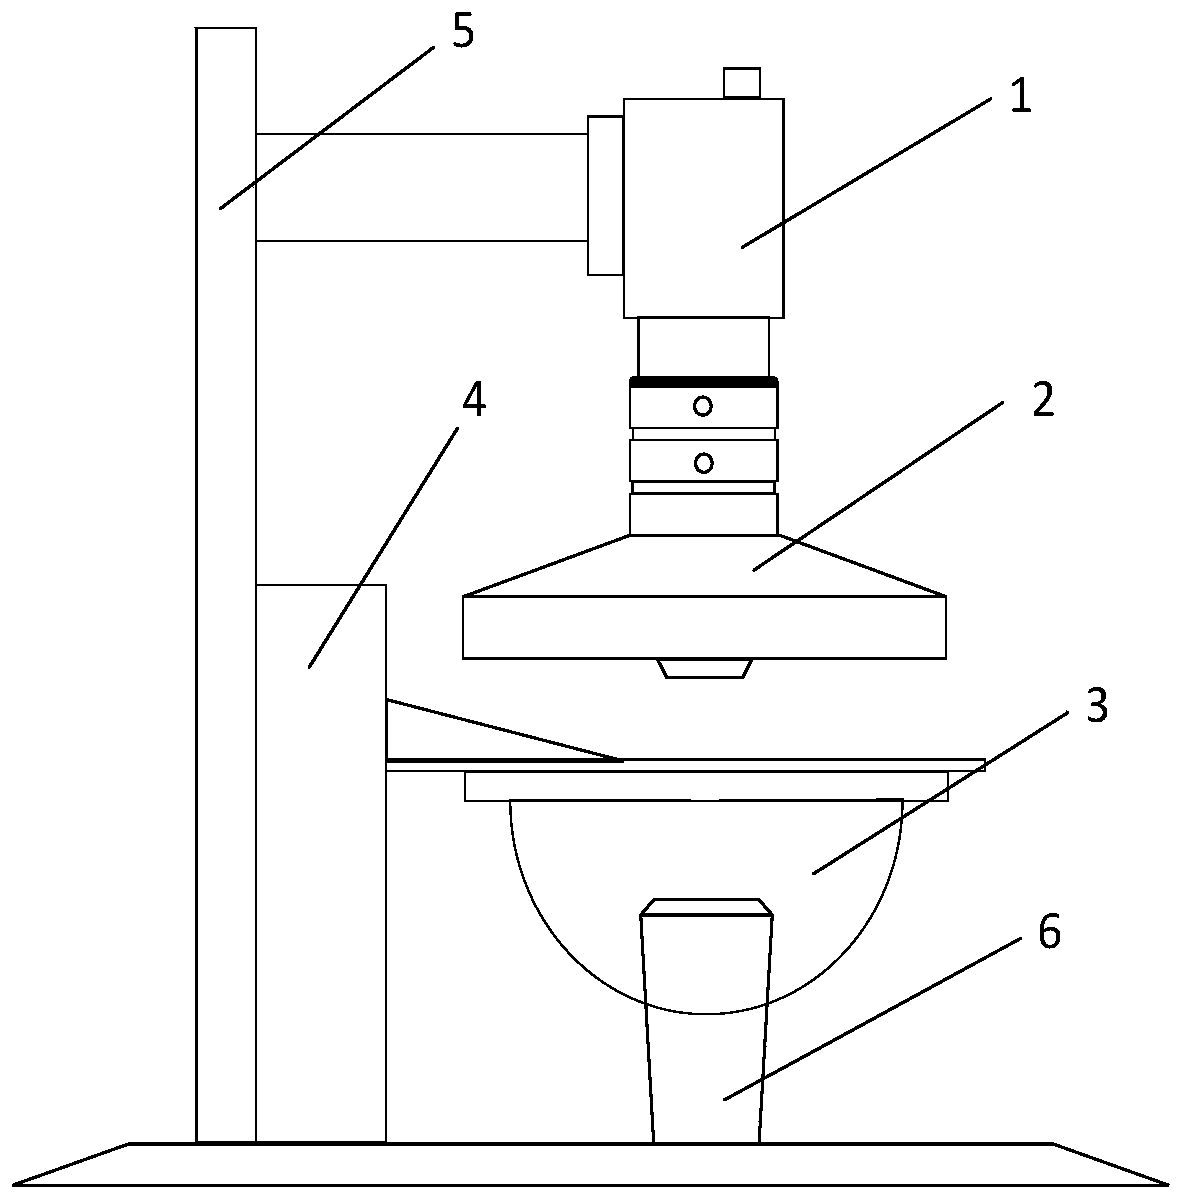 Bearing roller chamfering surface defect detection method based on machine vision